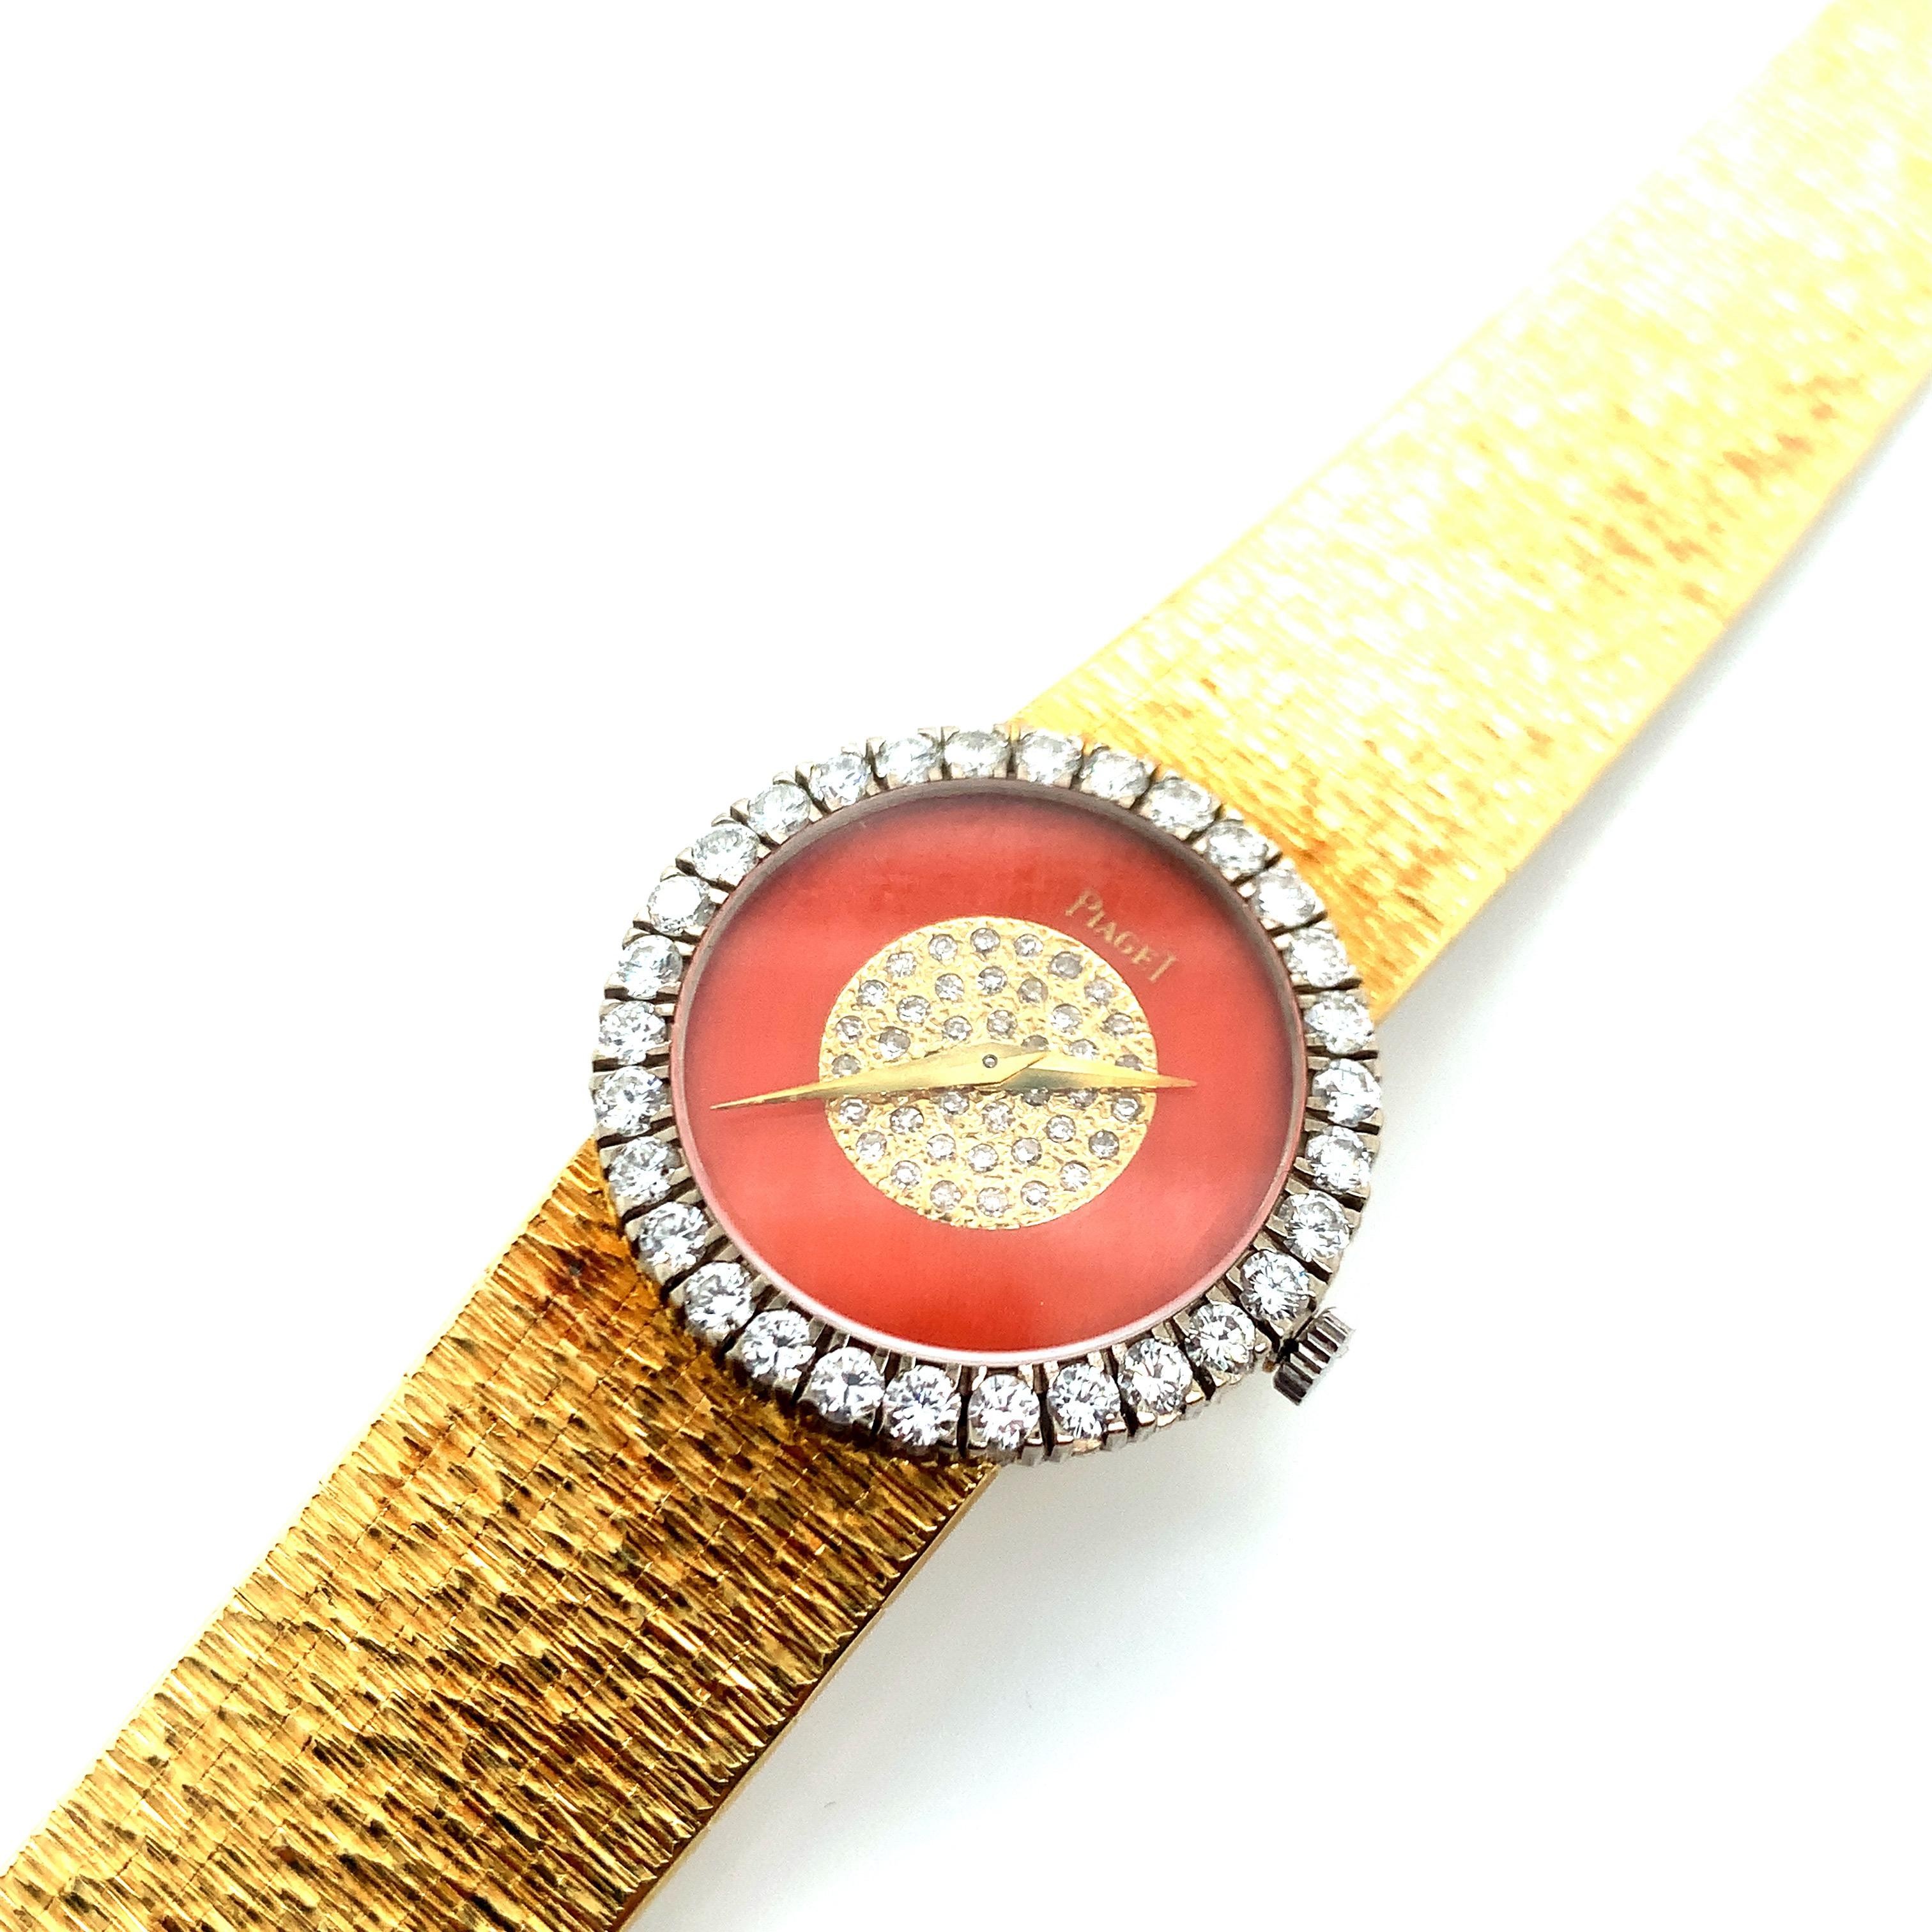 Signed Piaget, this watch has a dial made out of coral with diamonds at its center. Bigger diamonds line the dial's perimeter. These diamonds weigh approximately 1.2 carat. The straps are made out of 18 karat yellow gold. Total weight is 59.5 grams.